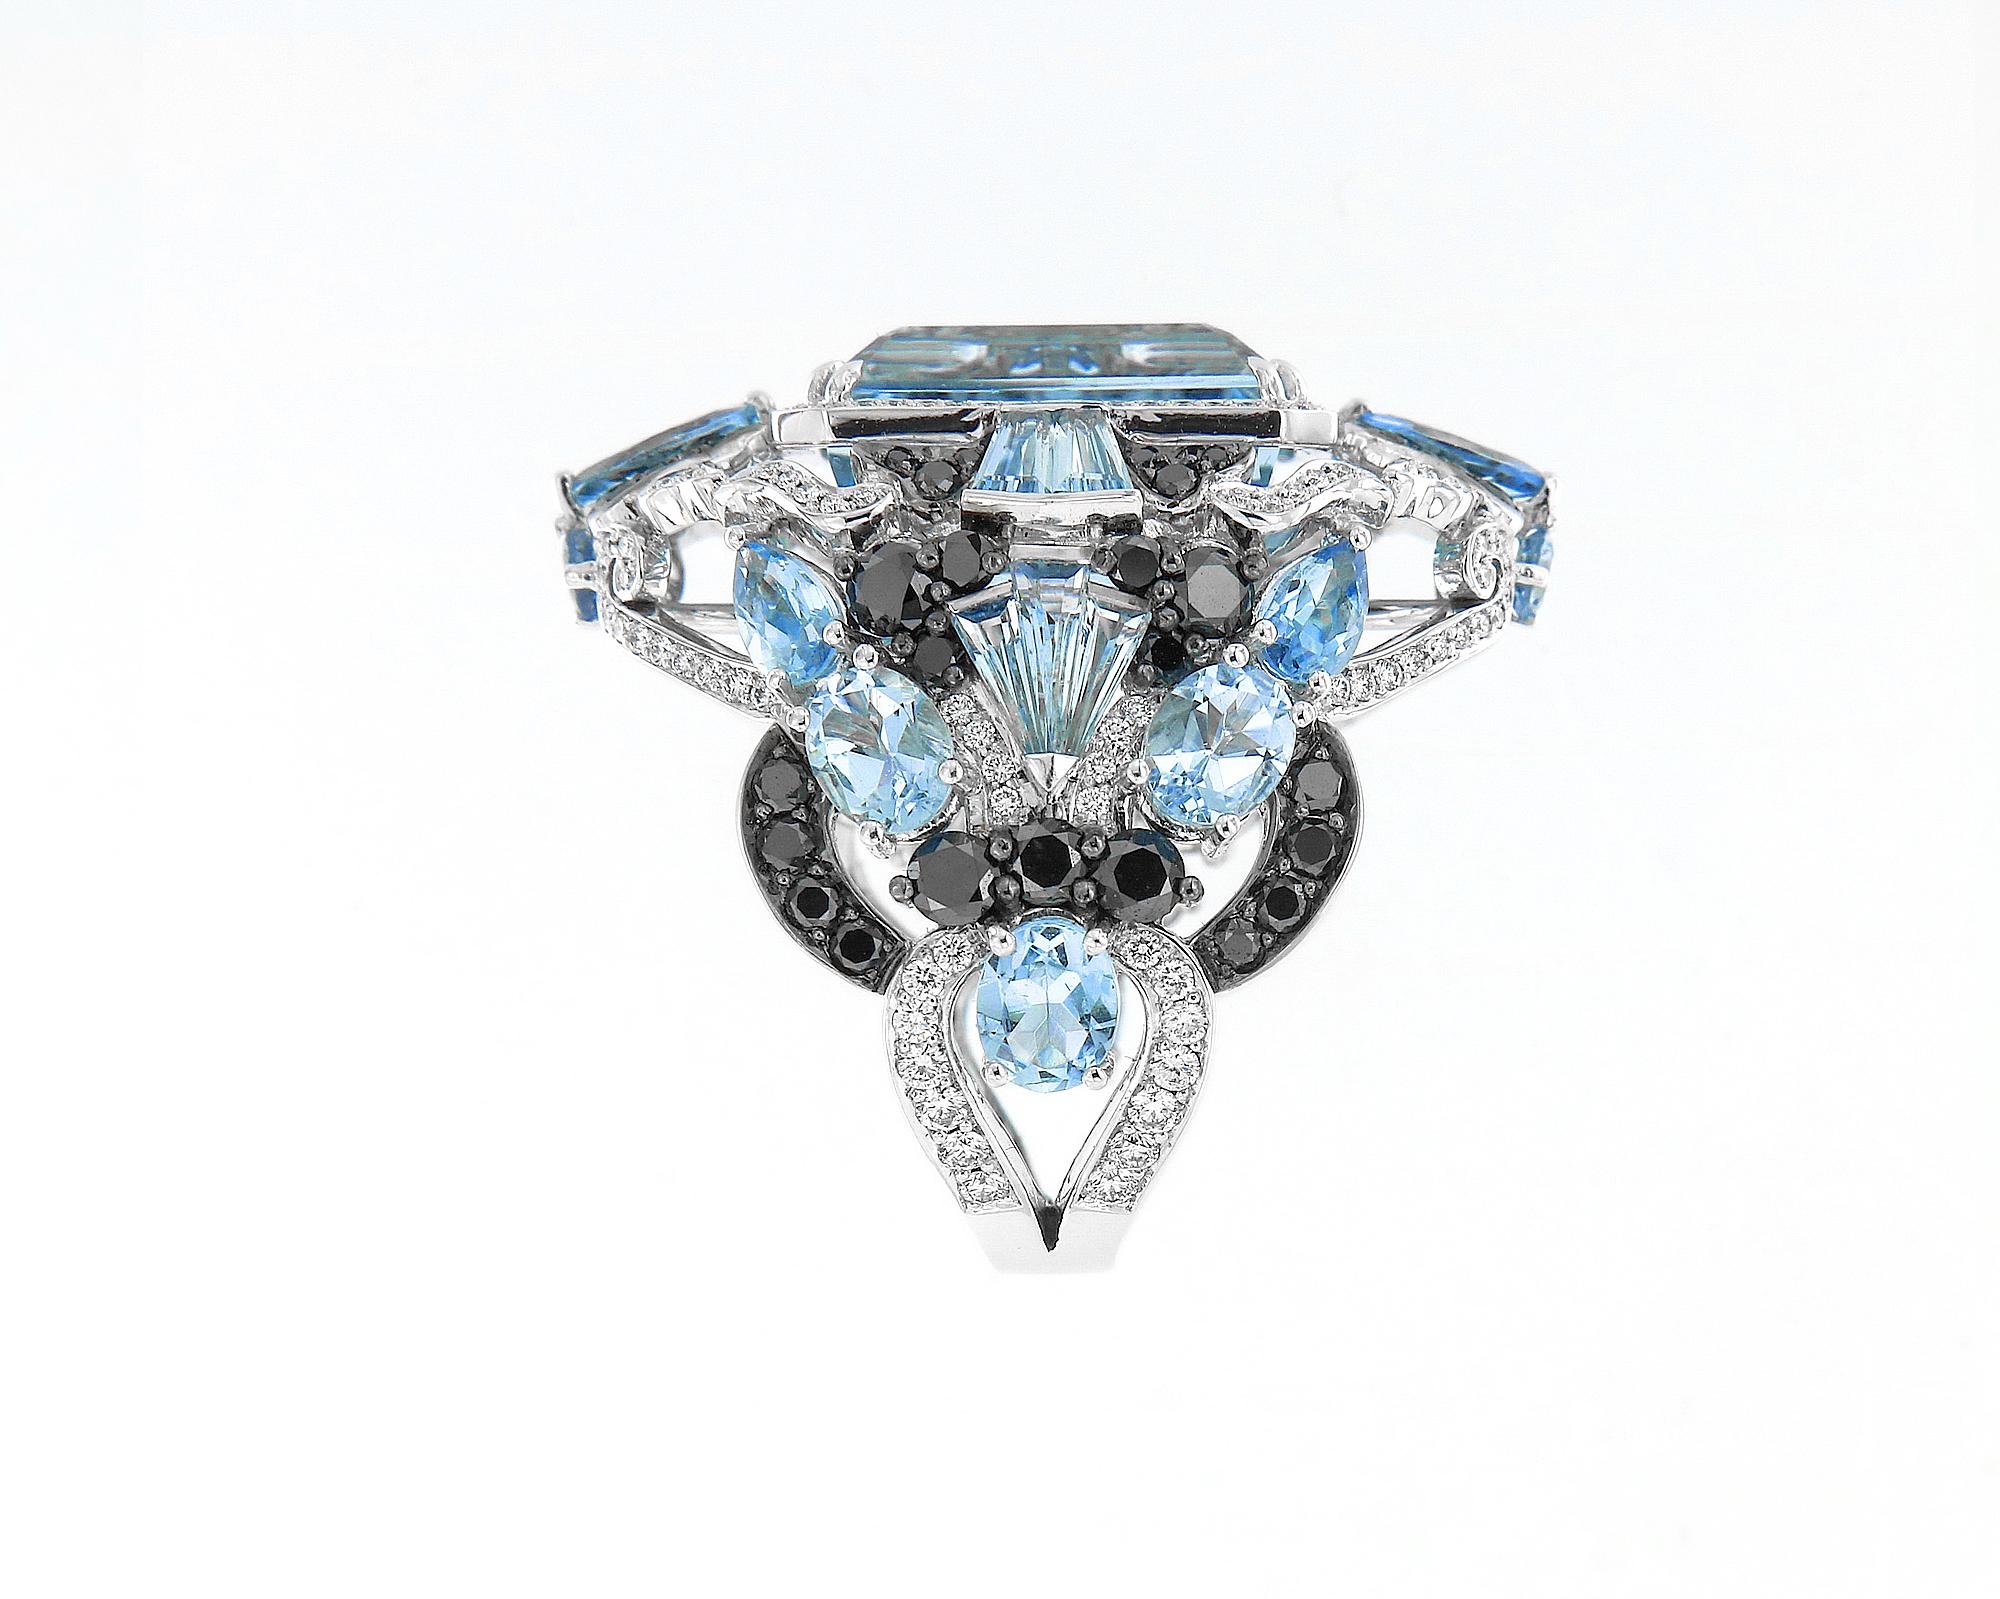 This stunning 9.27 carat emerald-cut baby blue Aquamarine makes you feel like royalty. The already impressive centre stone is further indulged by kisses of aquamarine with black and white diamonds of various shapes and sizes all over the band.